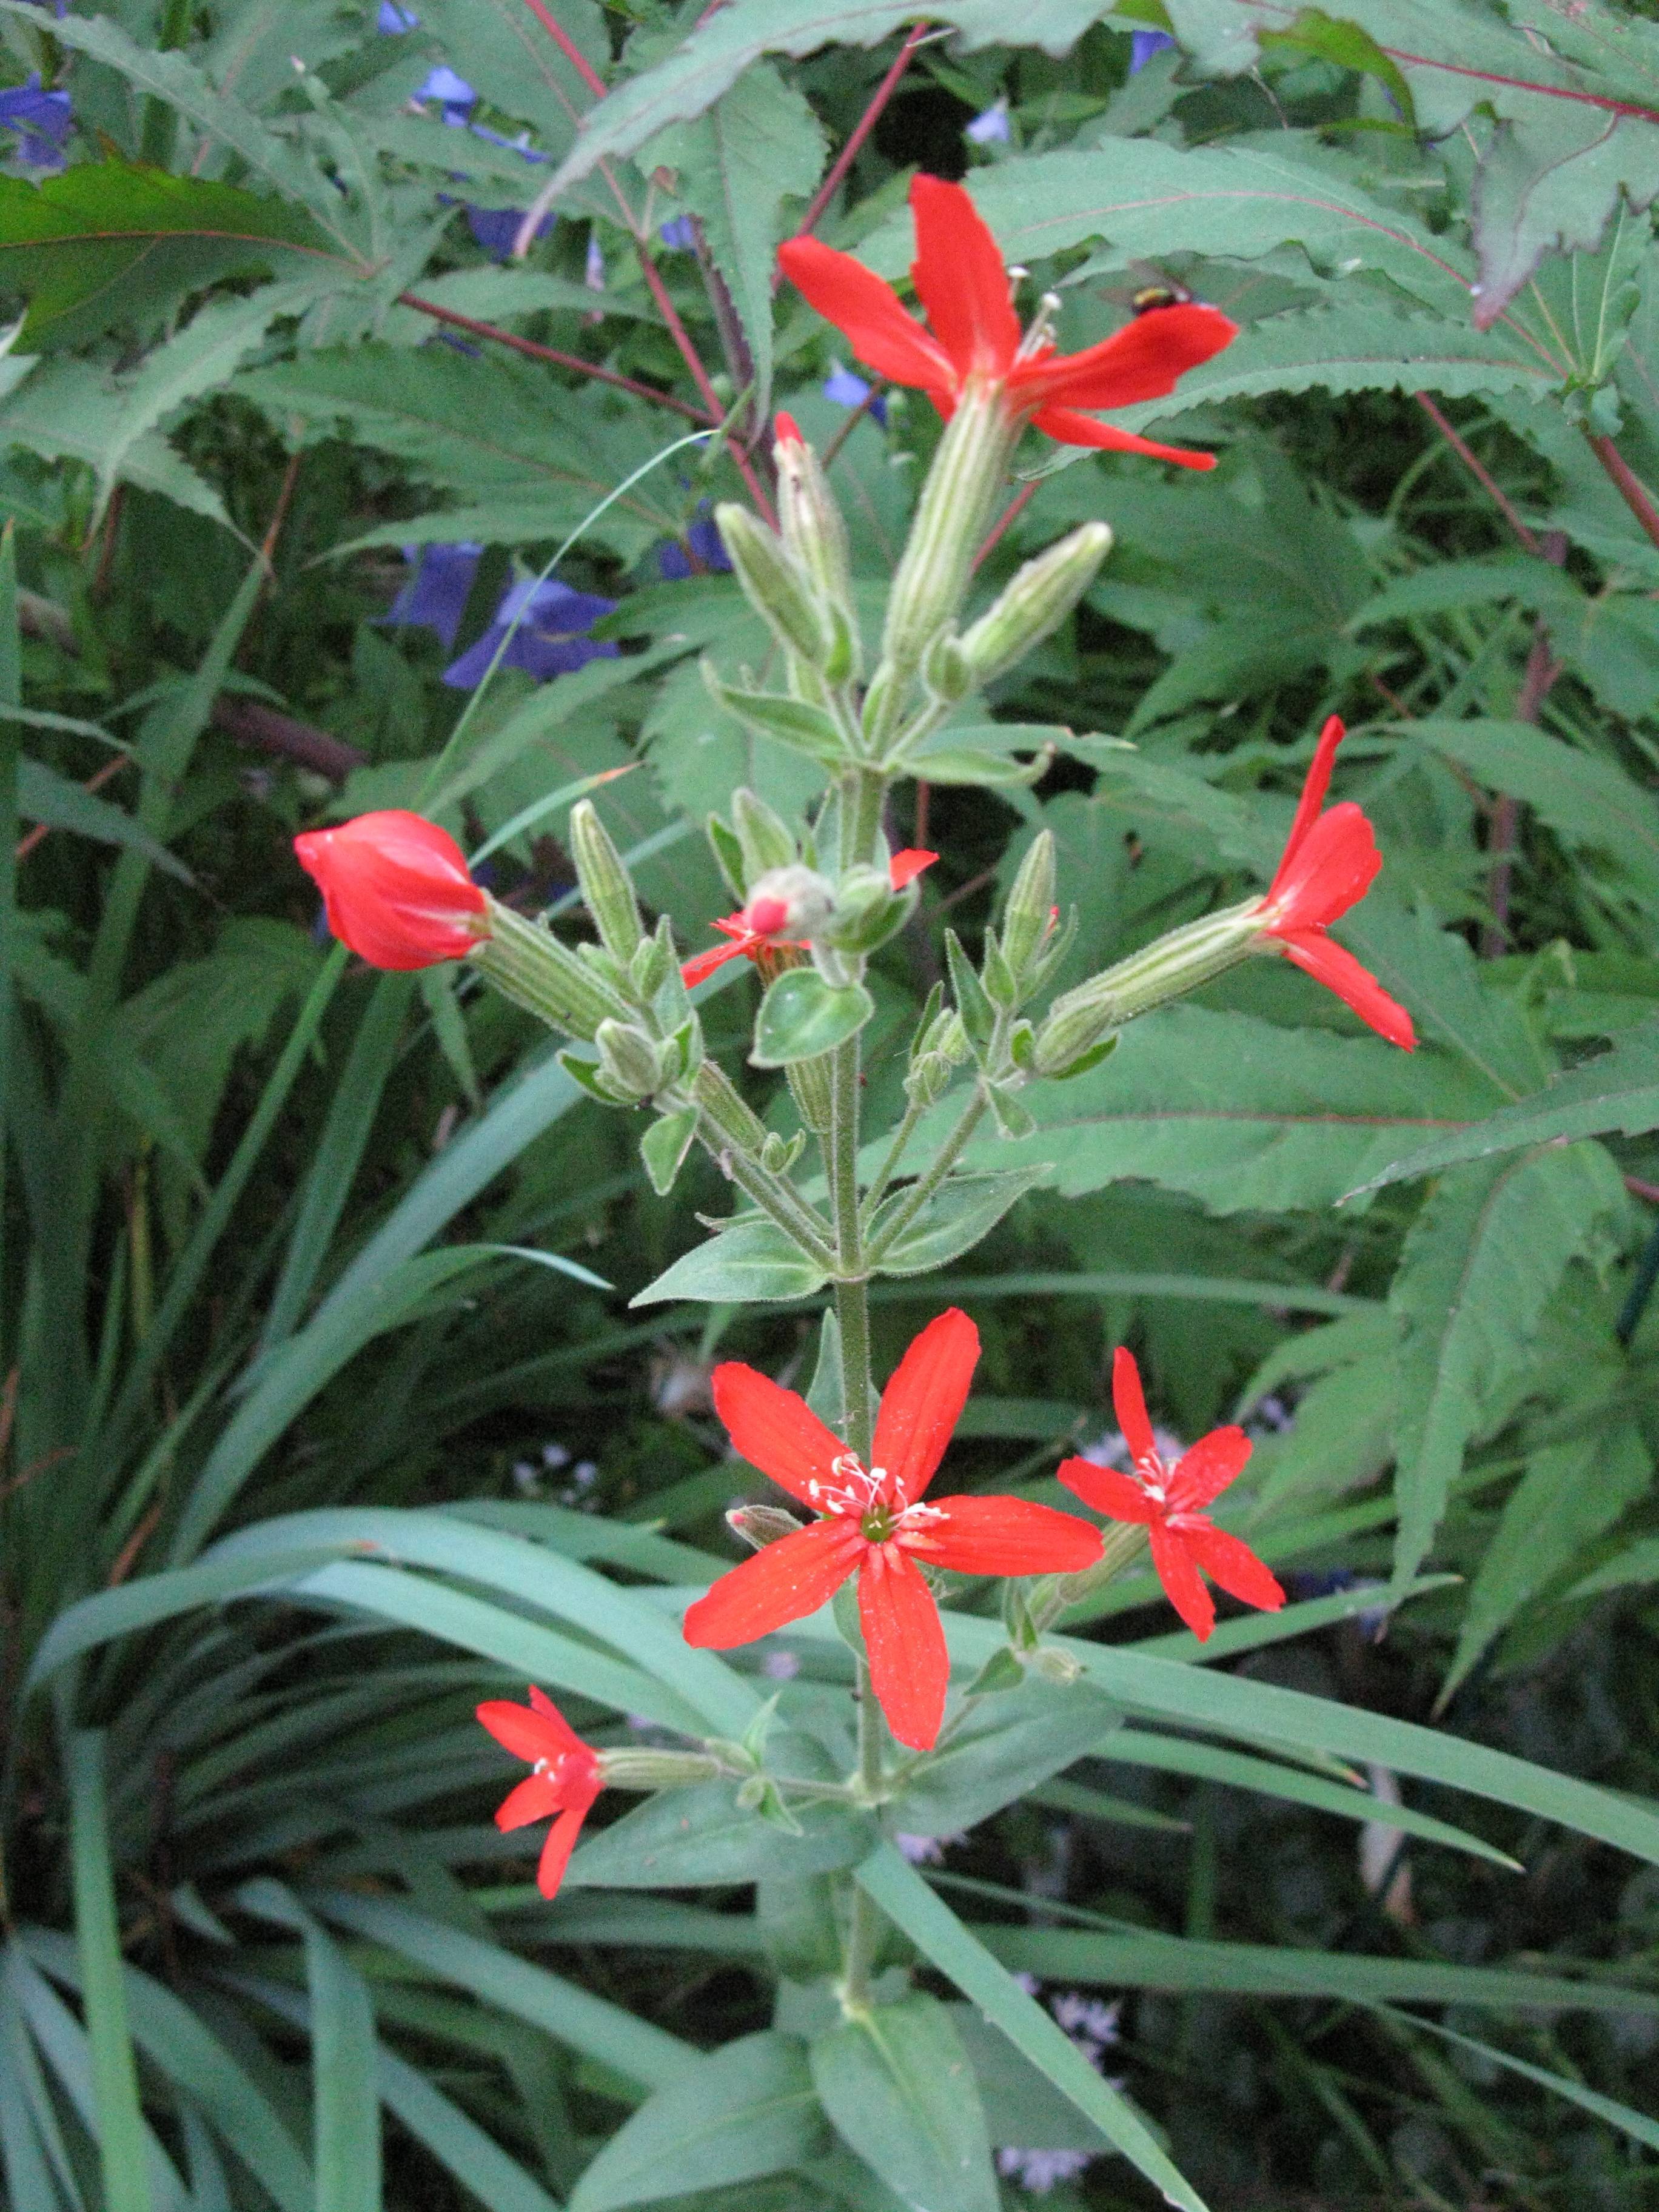 Tubular, fiery-red flowers with white stamens, hairy, green stems, small, green, hairy leaves, and buds